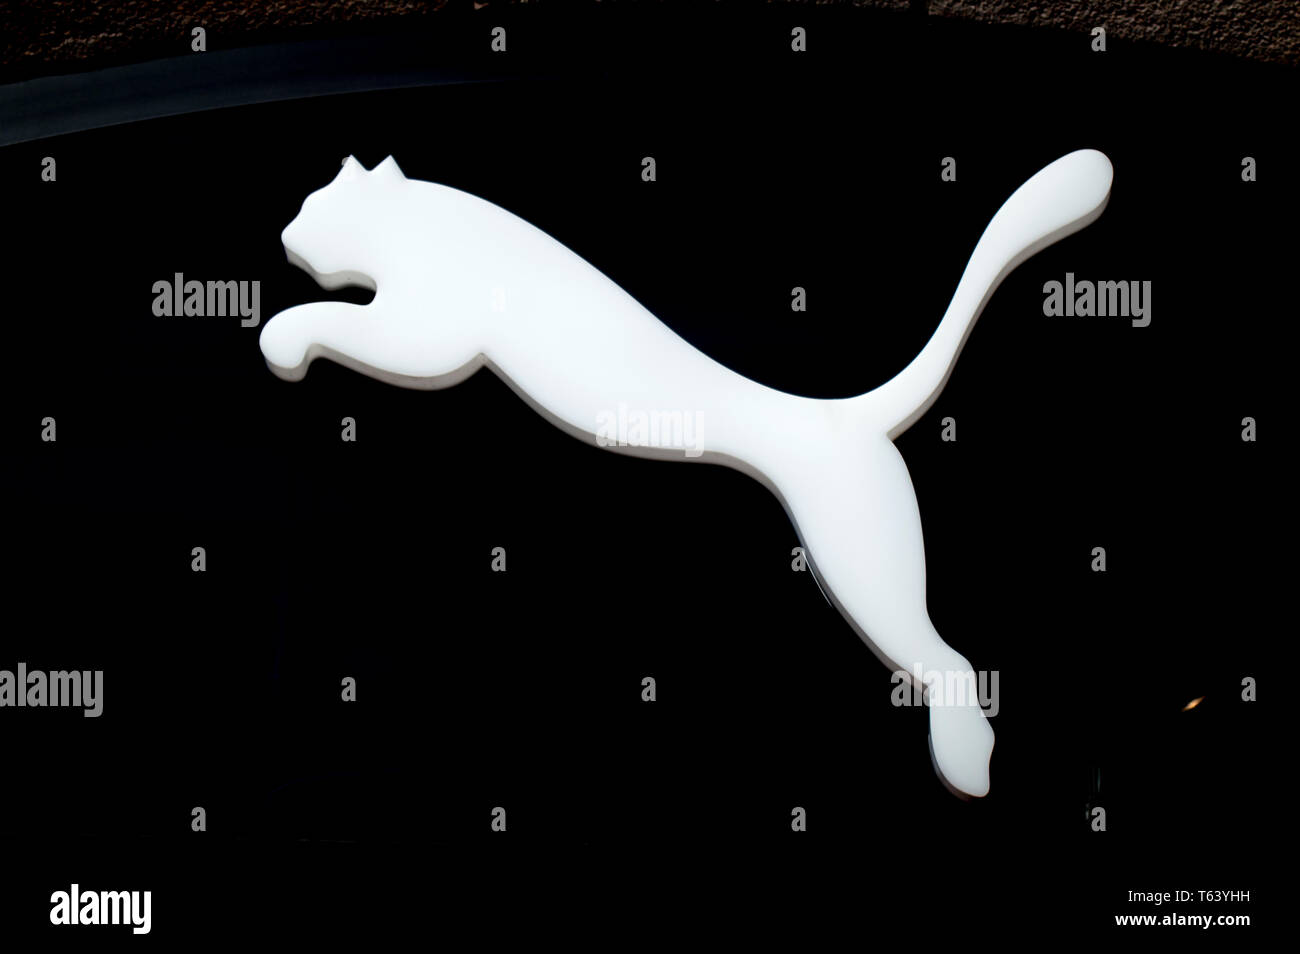 Puma Logo High Resolution Stock Photography and Images - Alamy